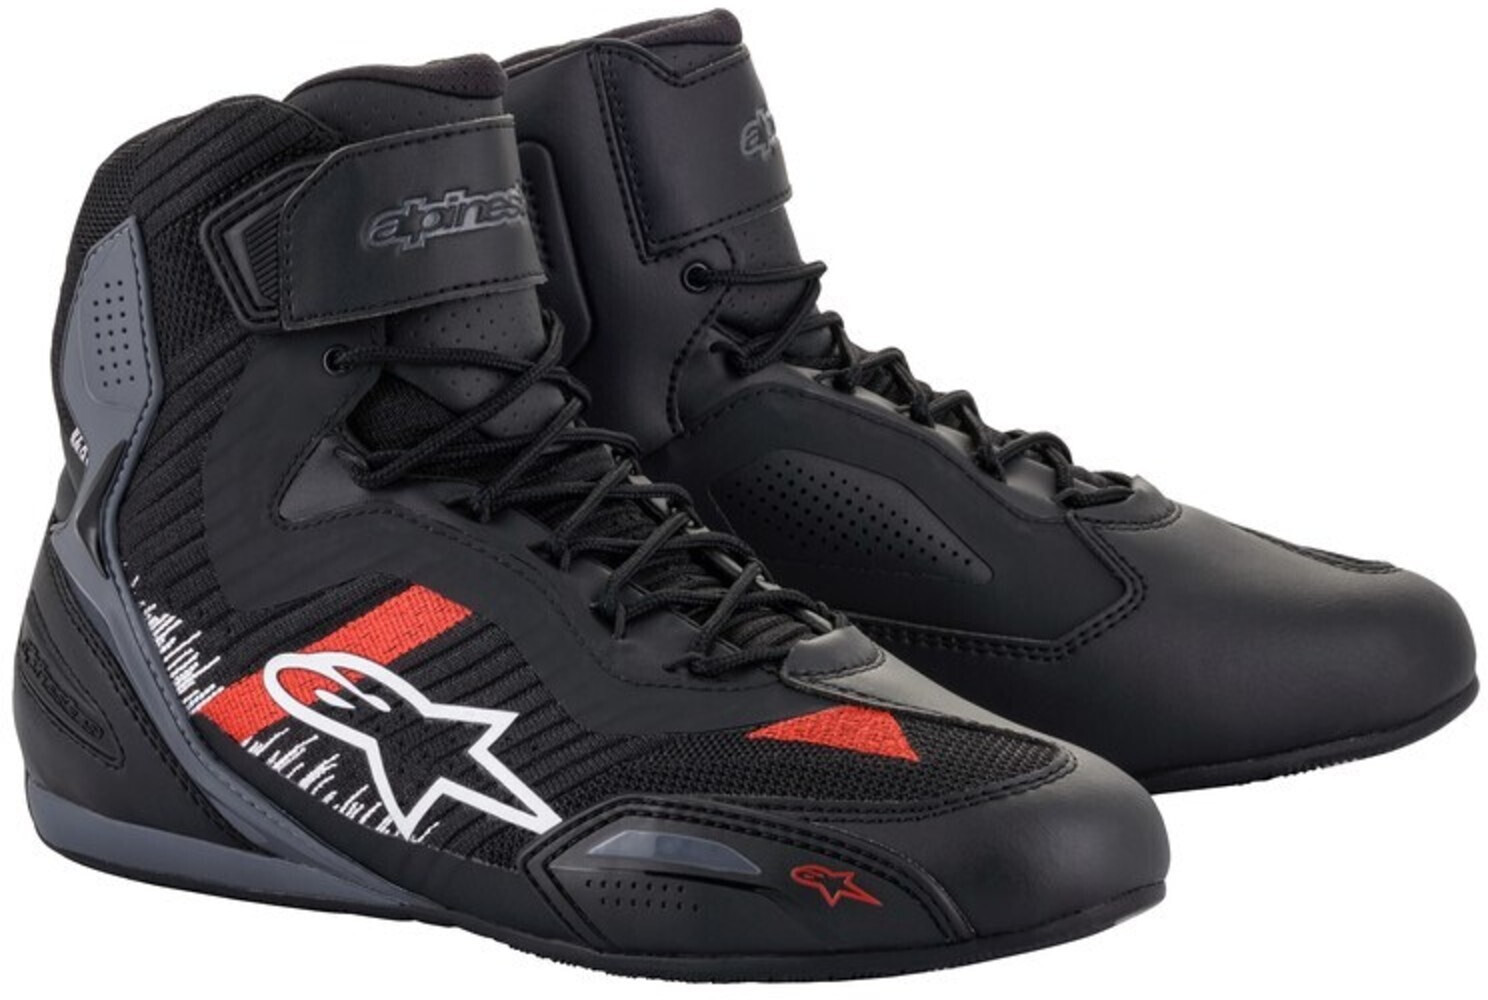 Photos - Motorcycle Boots Alpinestars Faster 3-Rideknit Boots Black/Grey/Red 